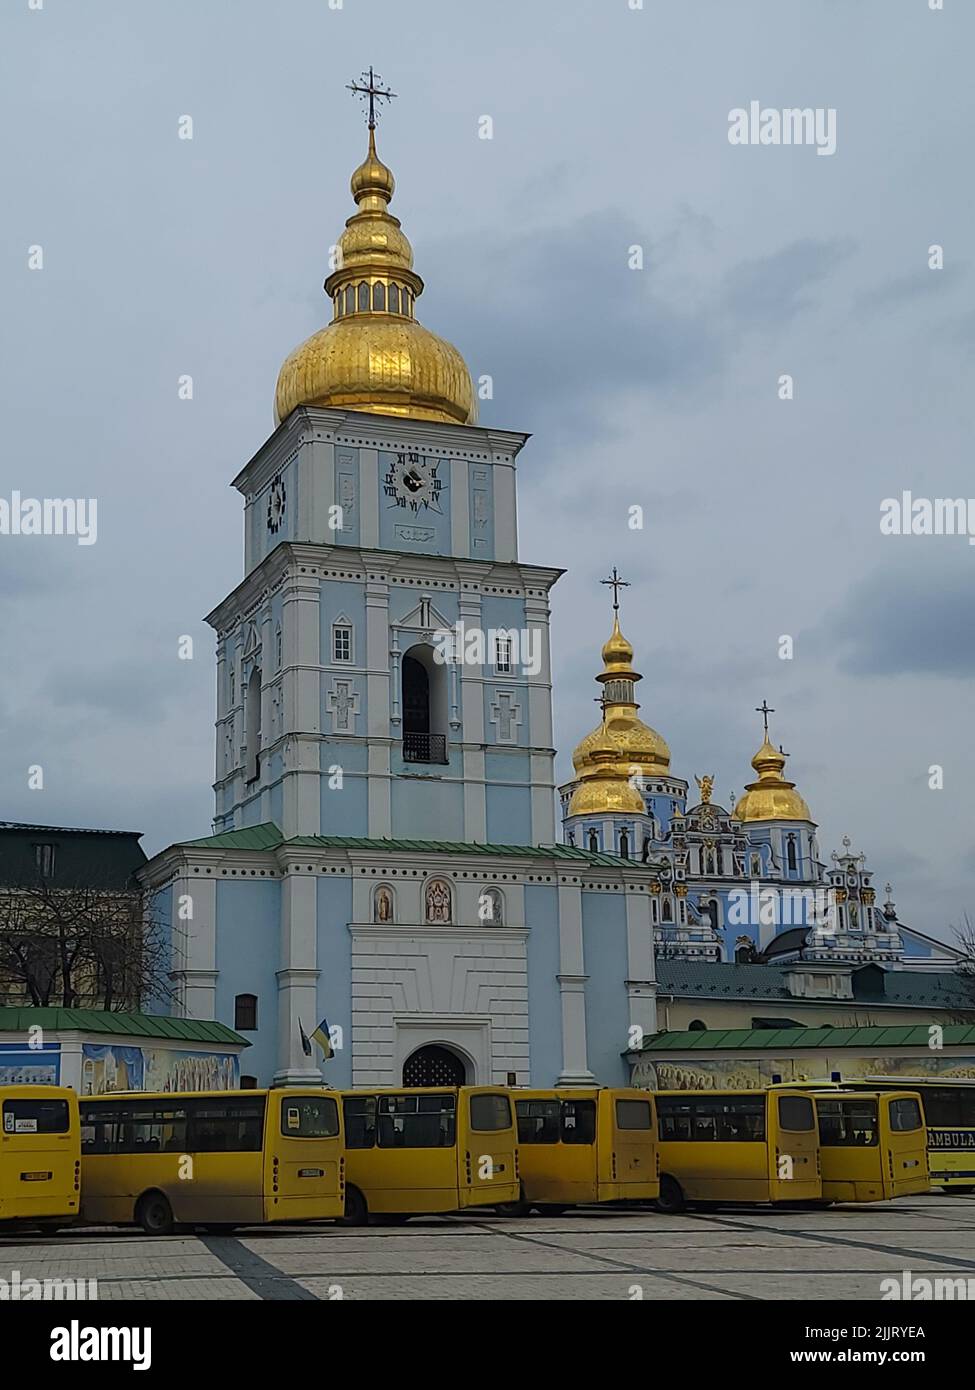 A vertical shot of ambulance buses in front of St. Michael's Golden-Domed Monastery in Kyiv, Ukraine. Stock Photo